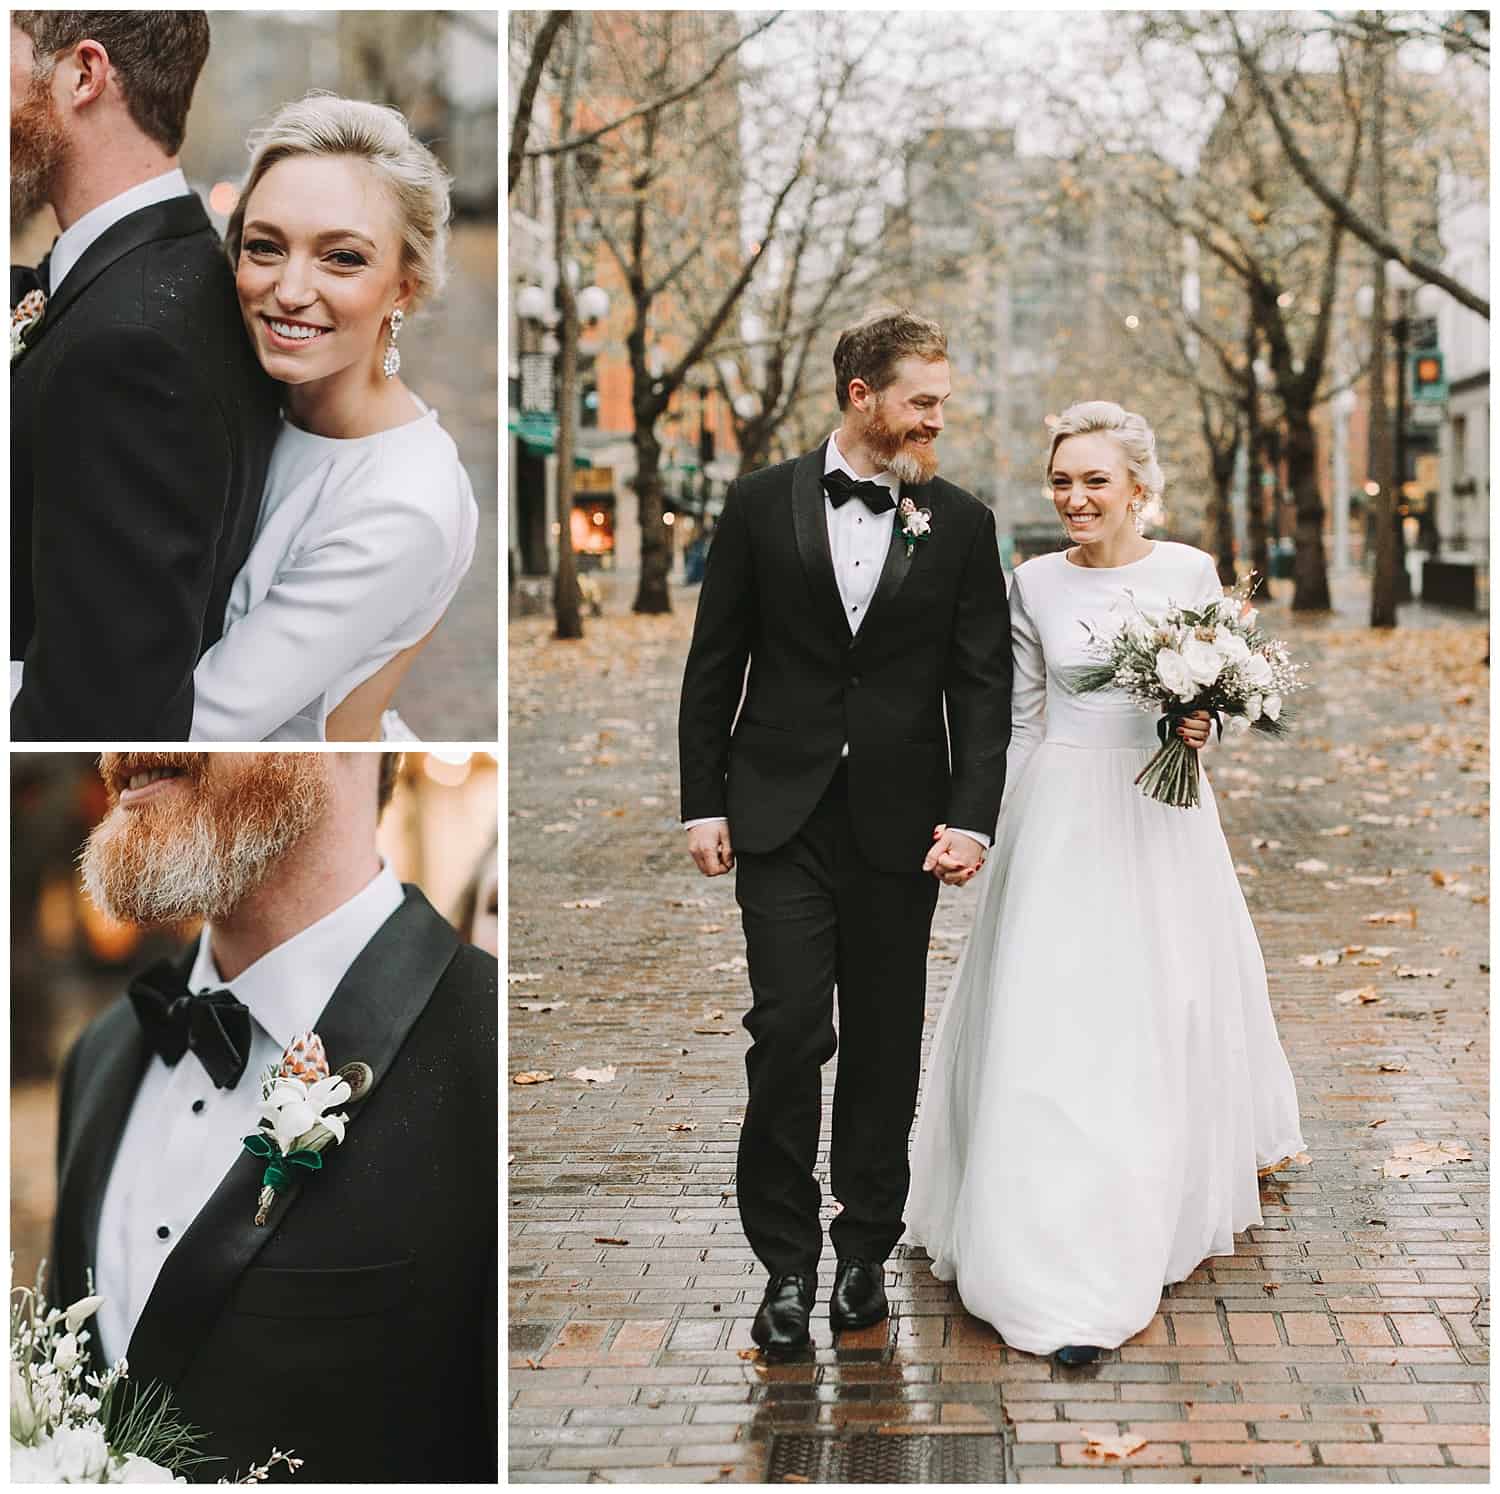 Axis Pioneer Square wedding & portraits in Occidental Square Seattle by Kyle Goldie of Luma Weddings